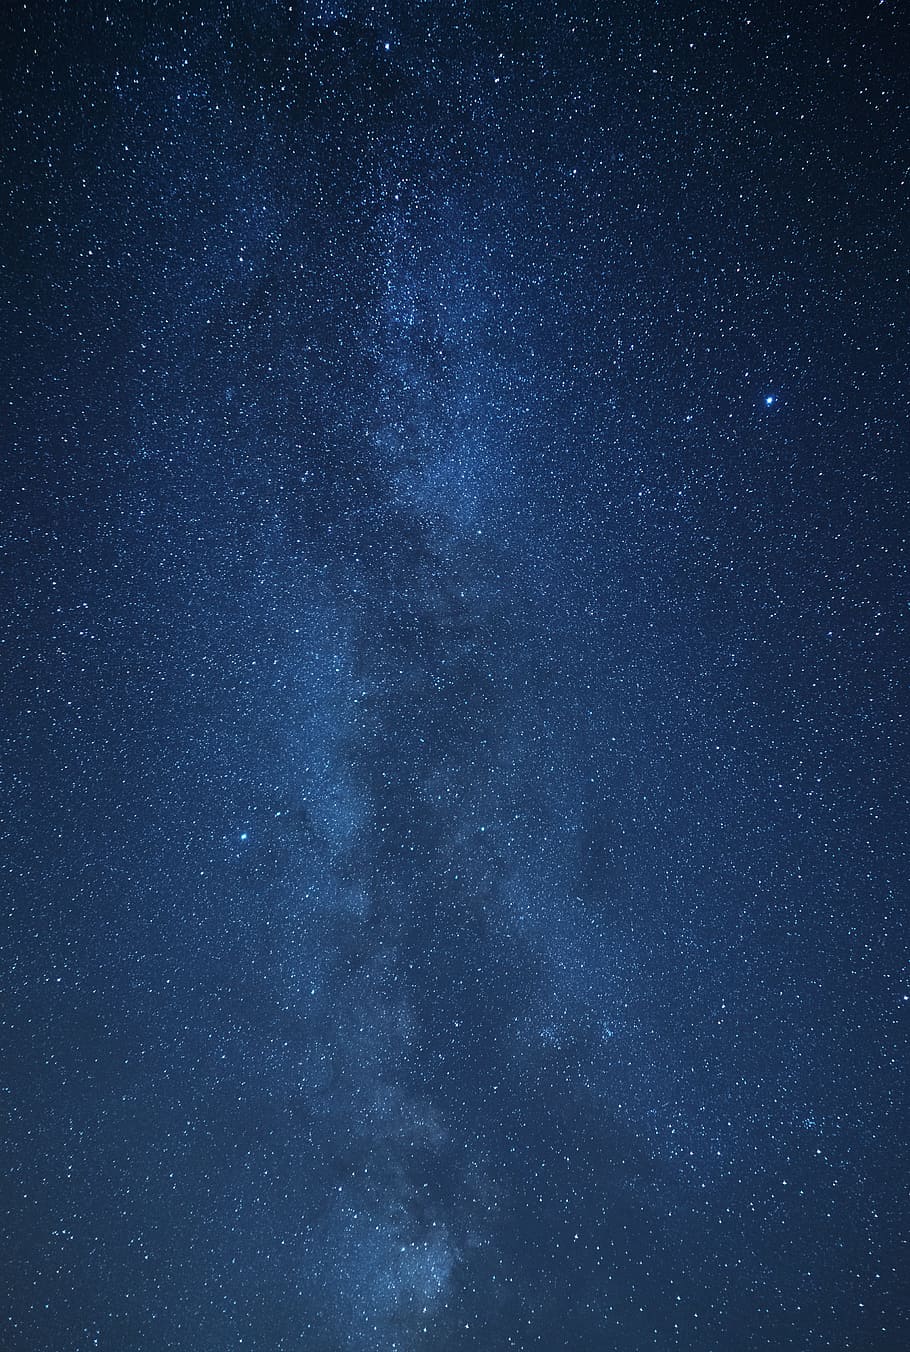 stars 3d wallpaper, milky way, star, starry sky, cosmos, evening, space, universe, star - space, astronomy